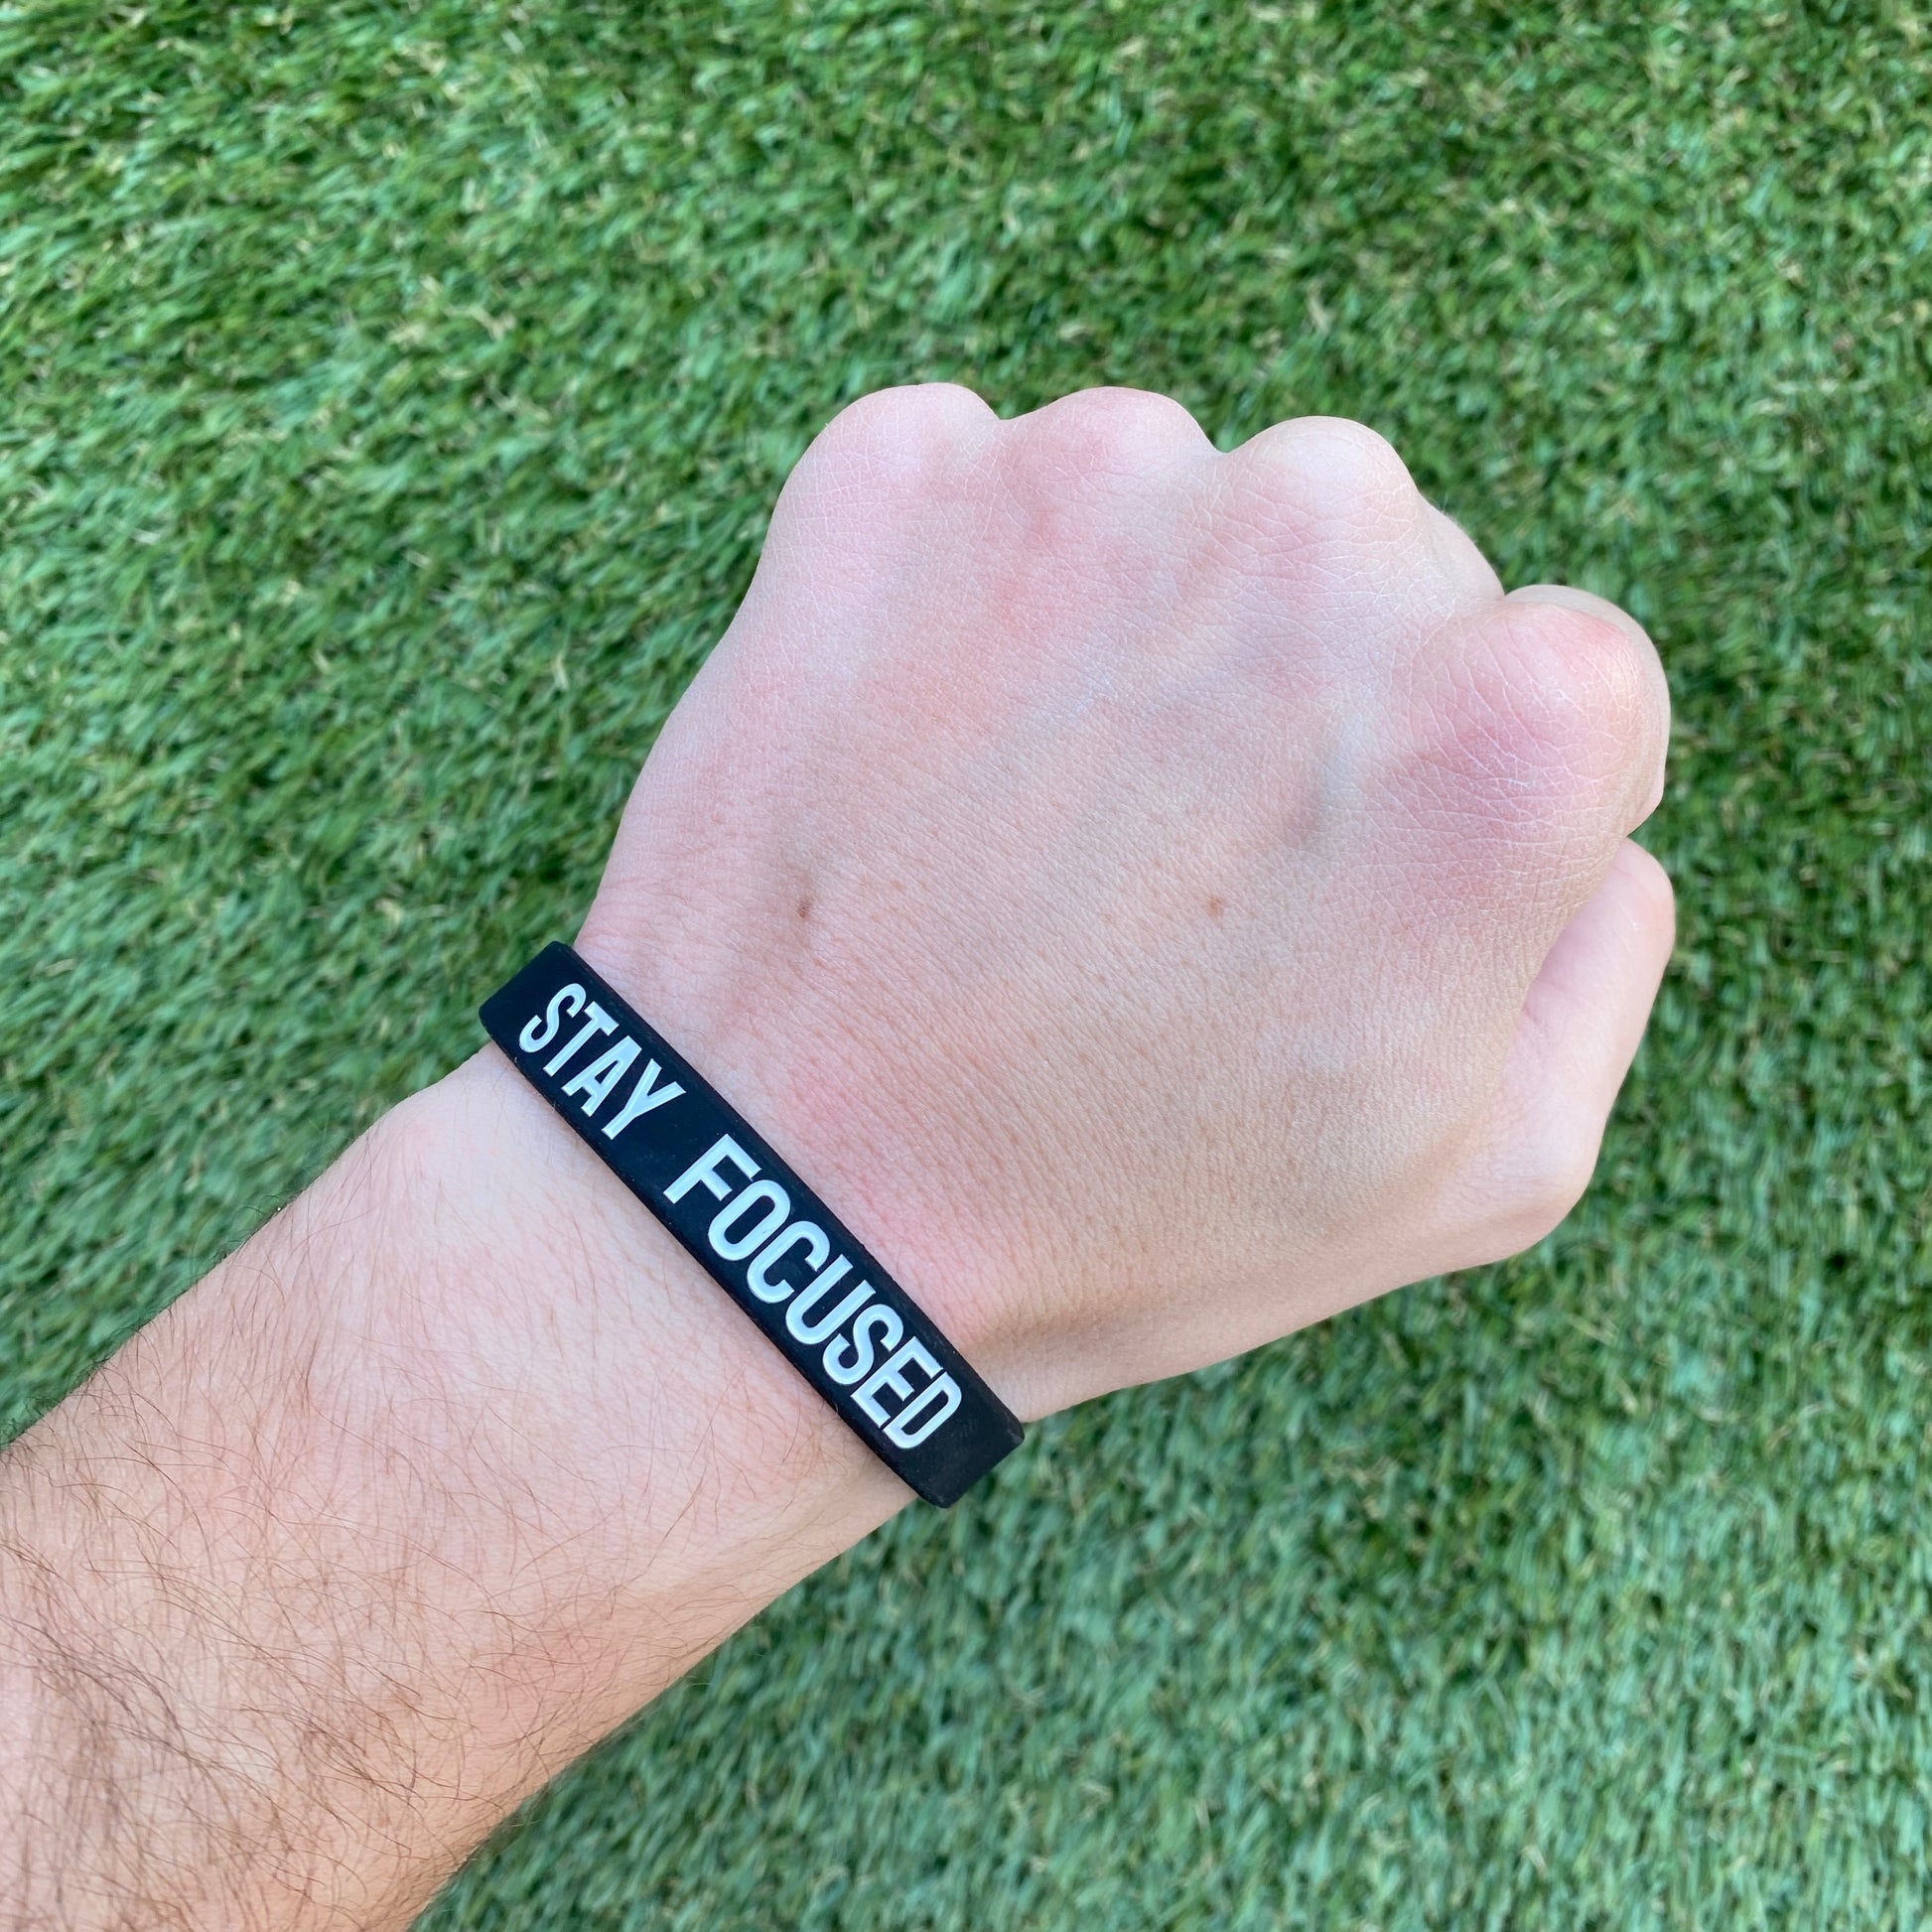 STAY FOCUSED Wristband